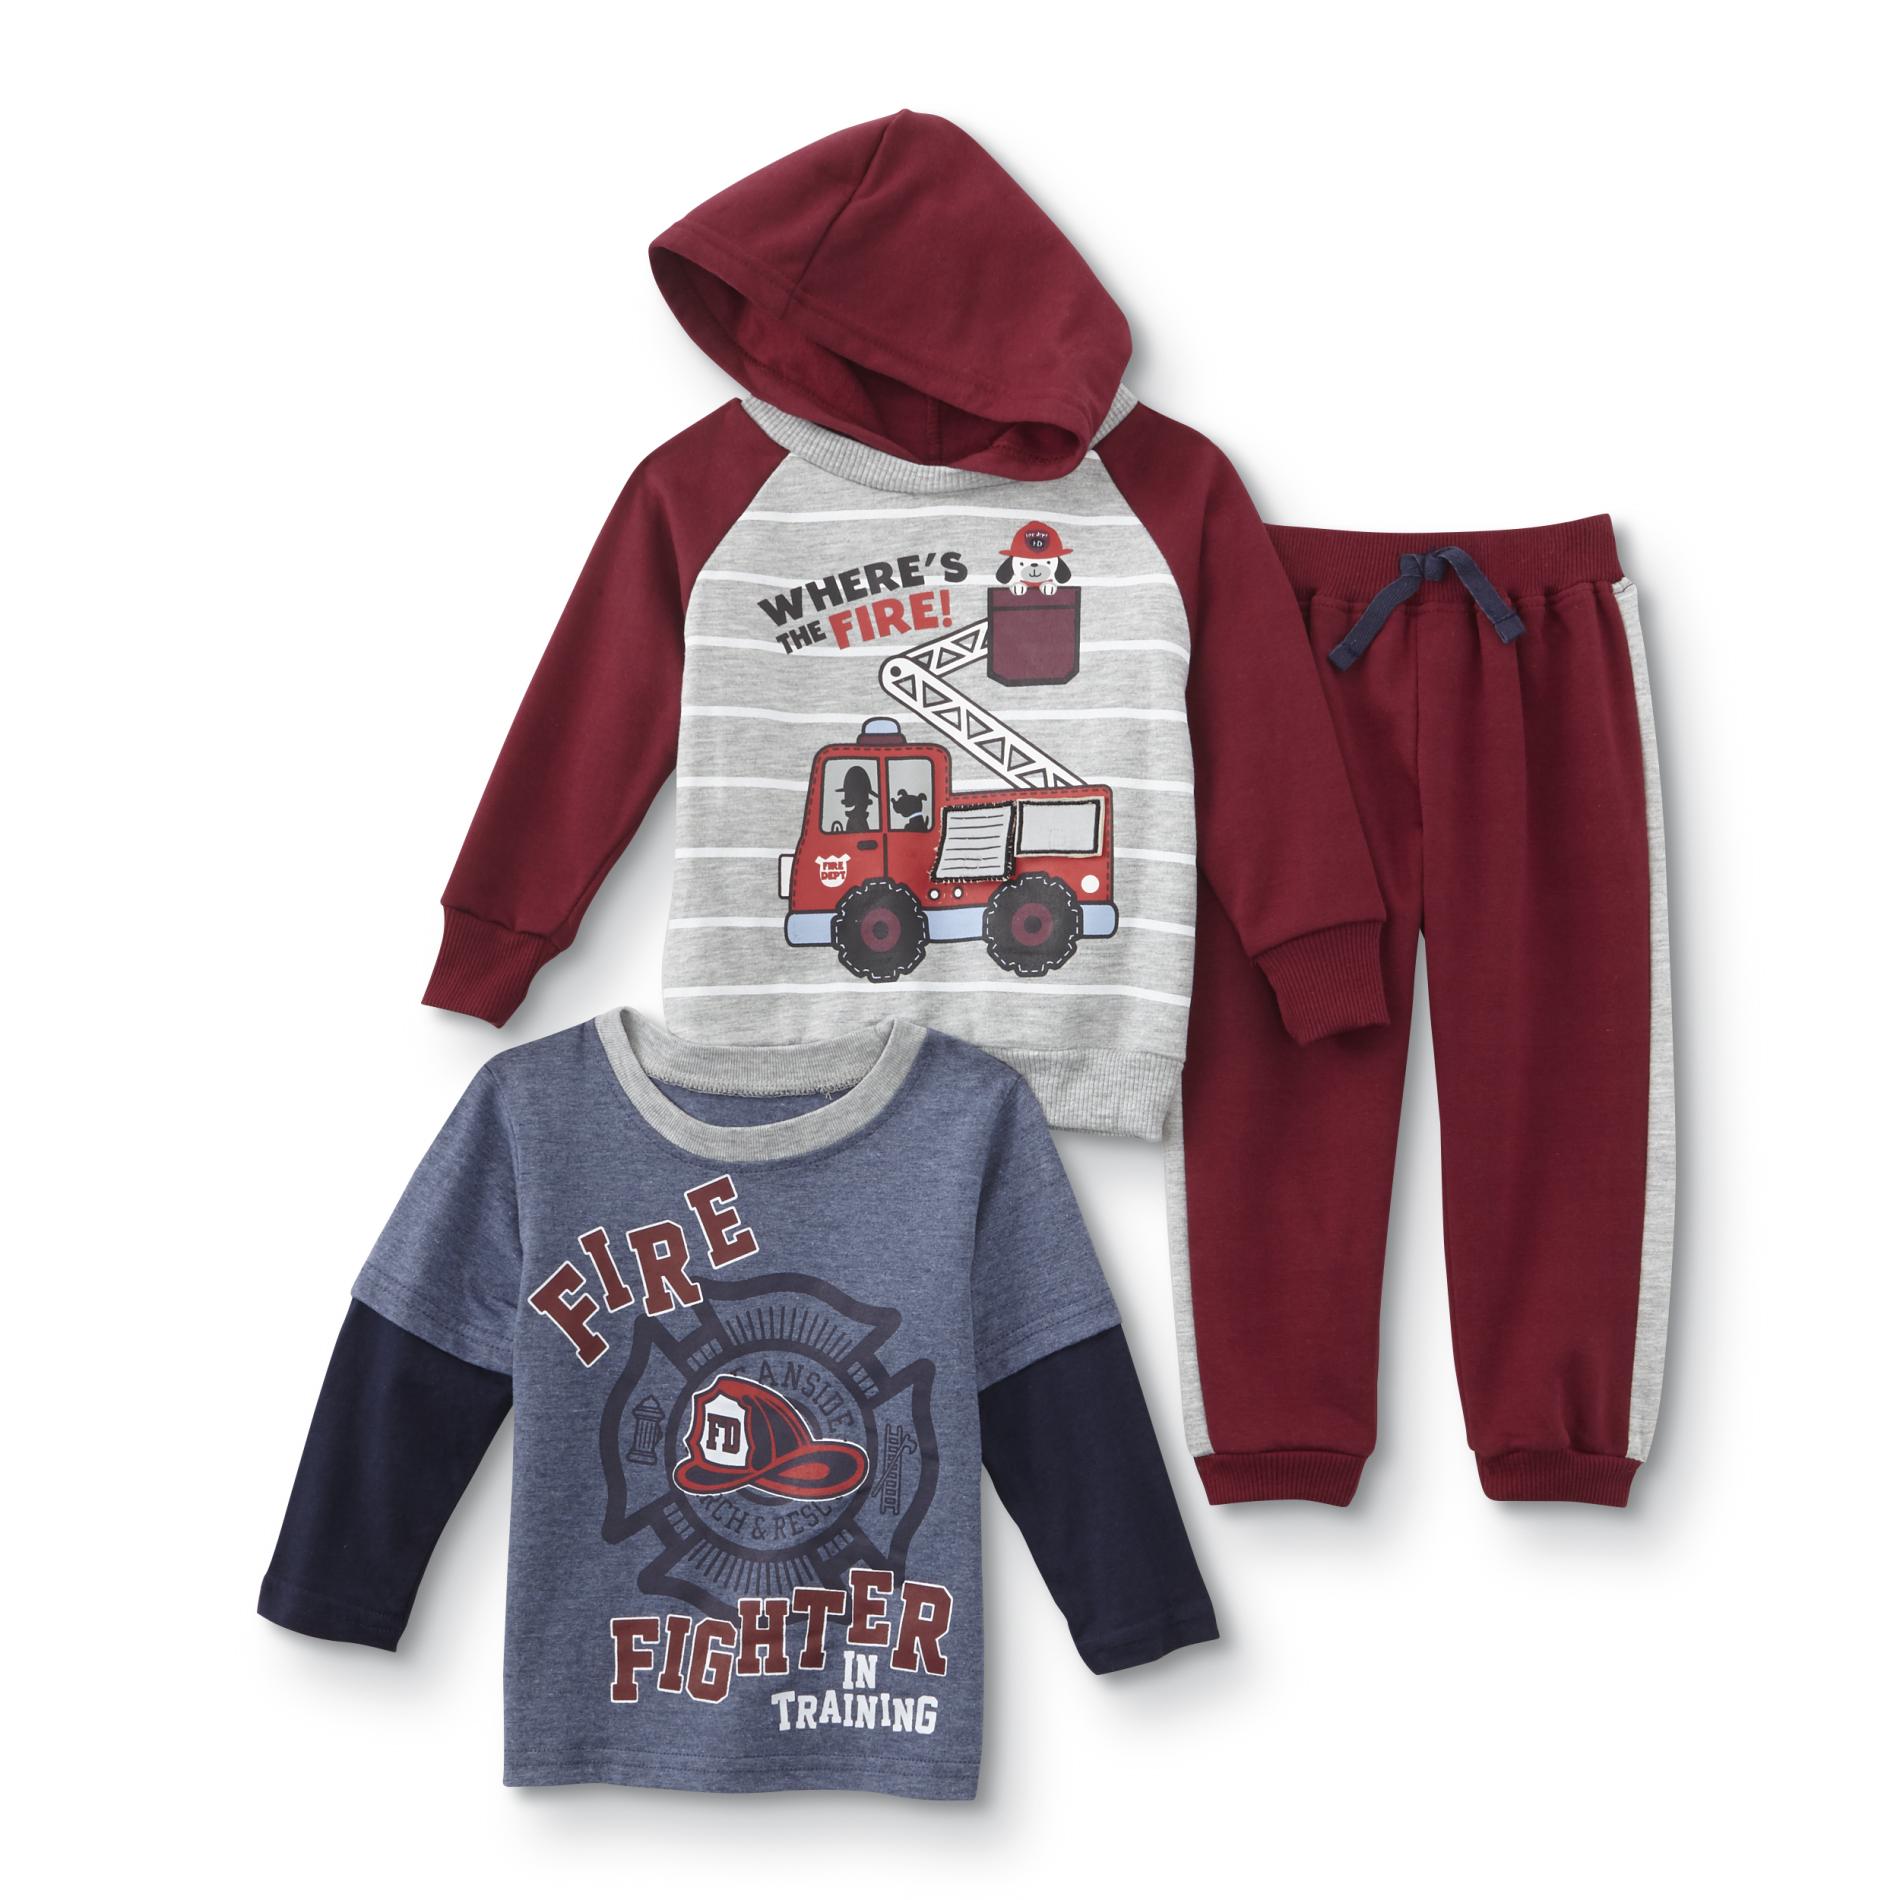 Little Rebels Infant Boys' Graphic Shirt, Hoodie & Sweatpants - Firefighter in Training